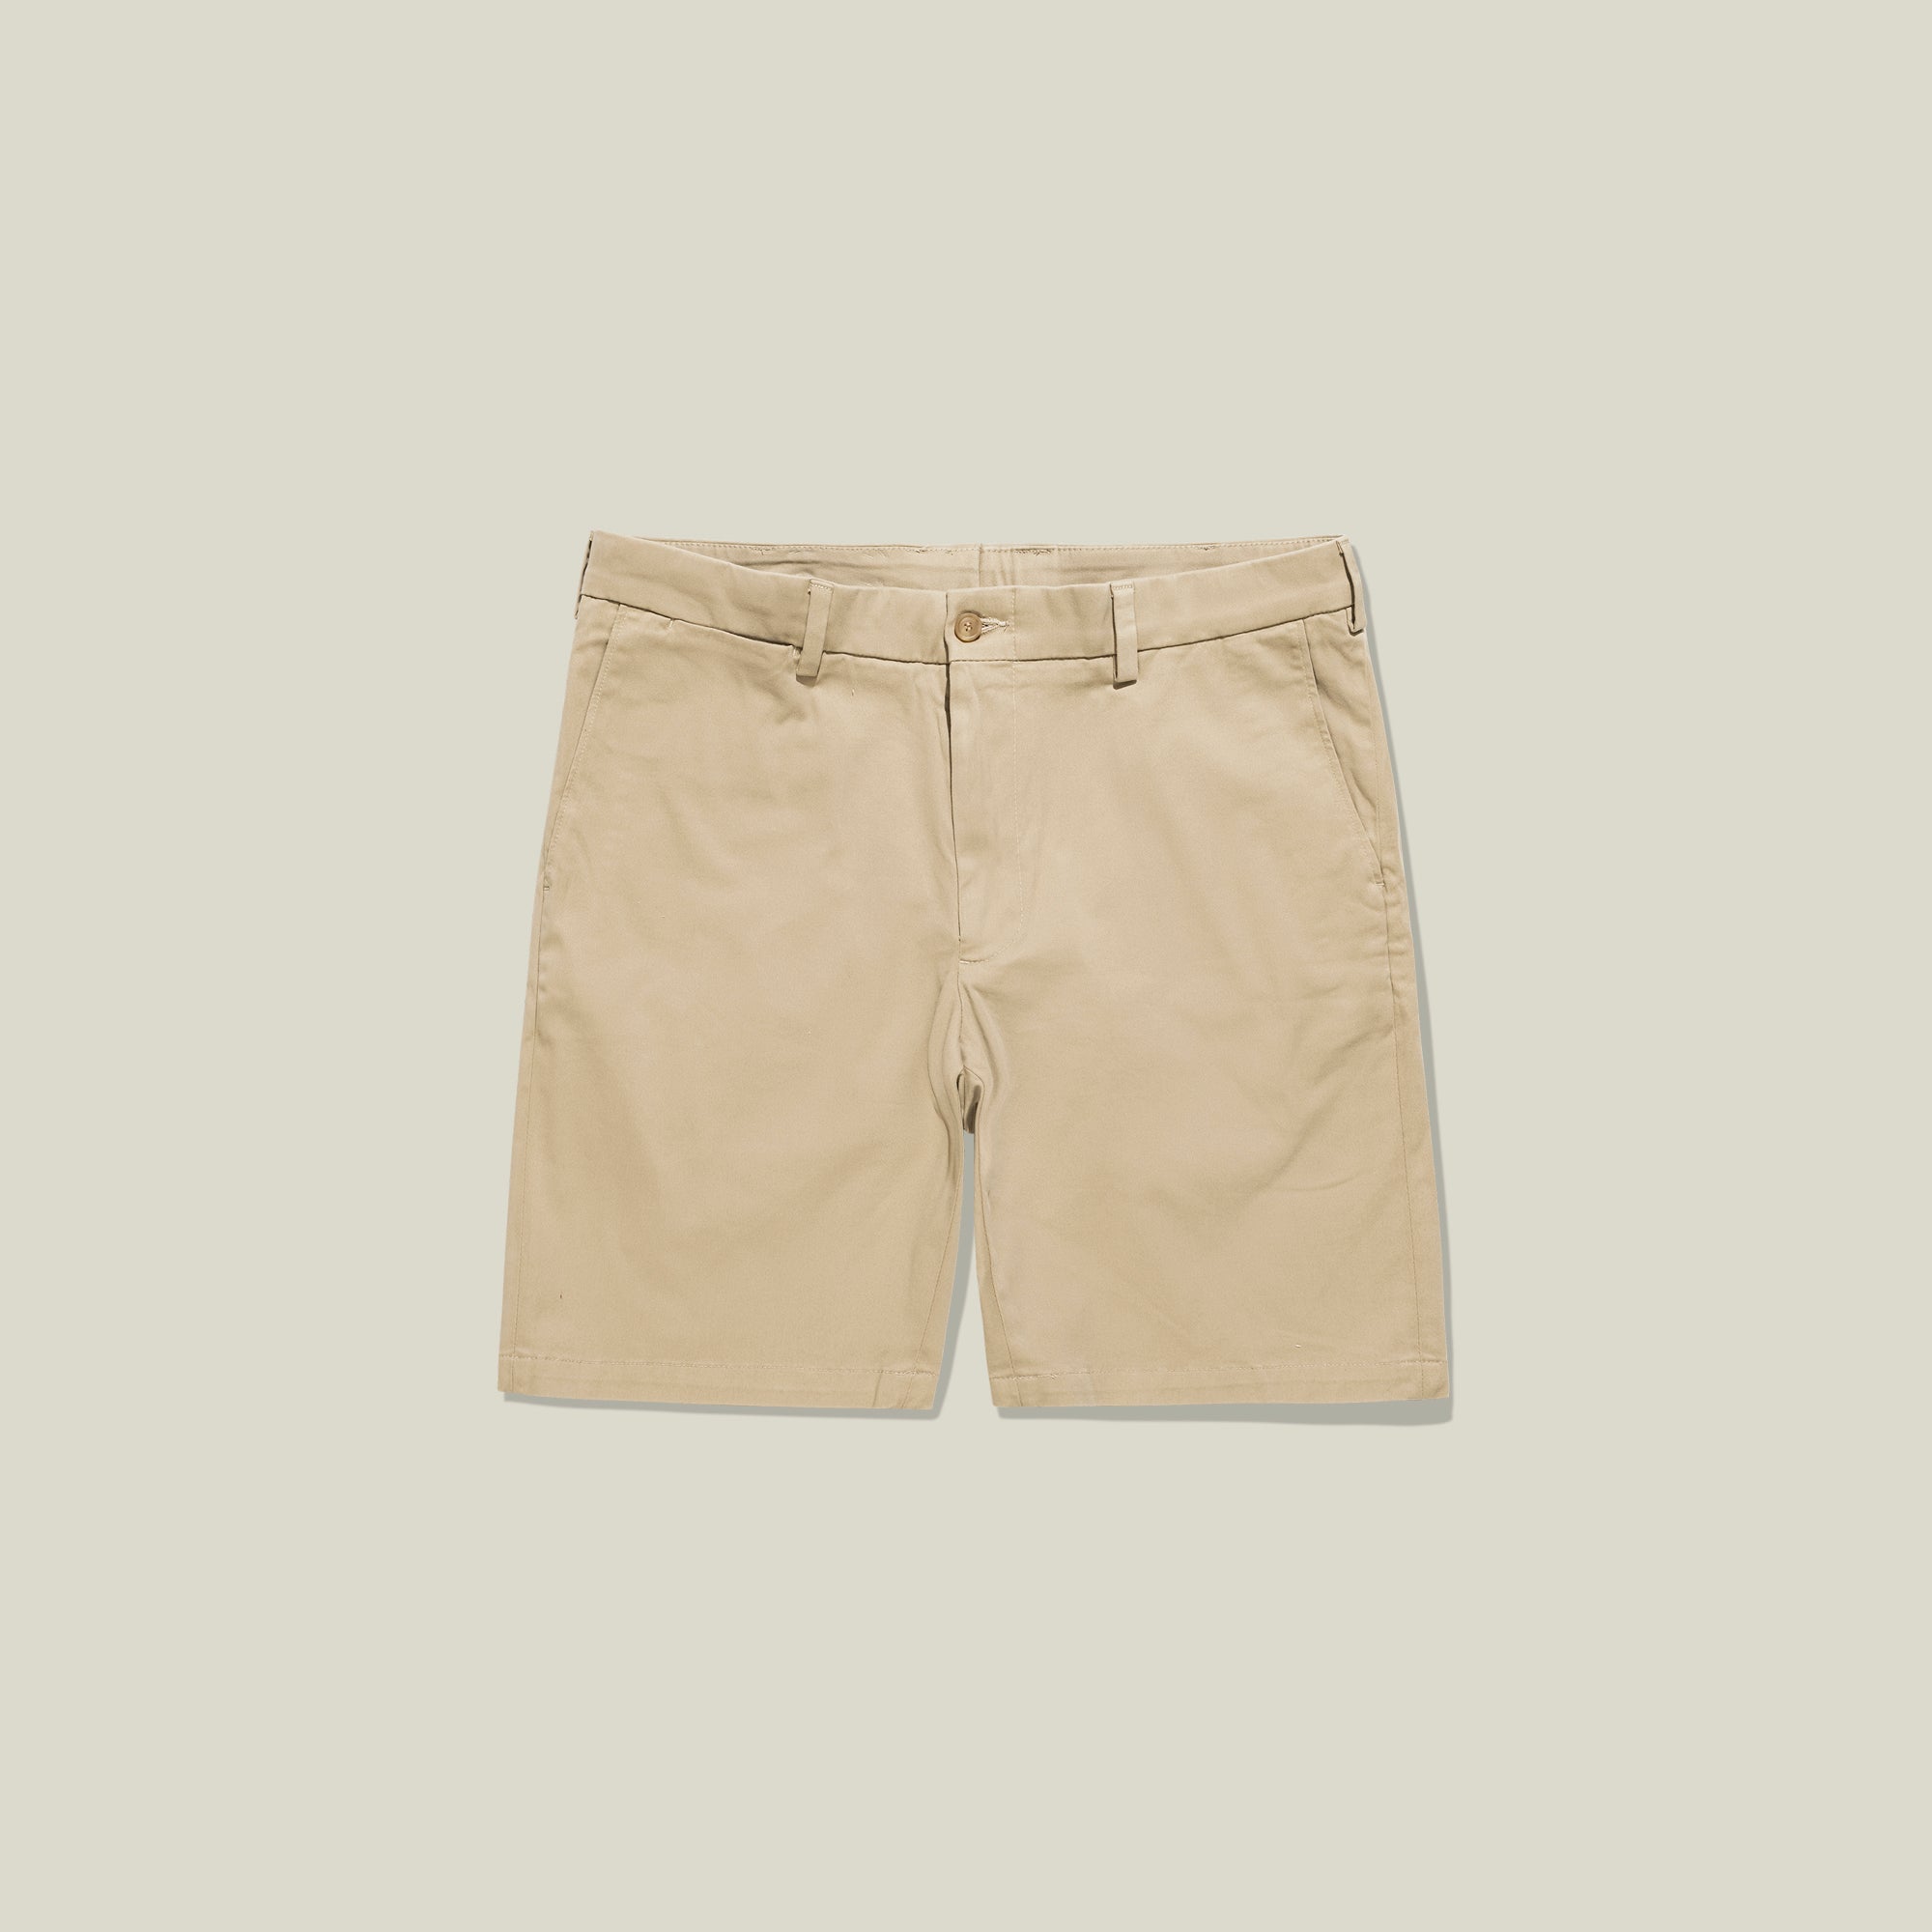 M3S - Straight Fit Shorts - Clubhouse Twill